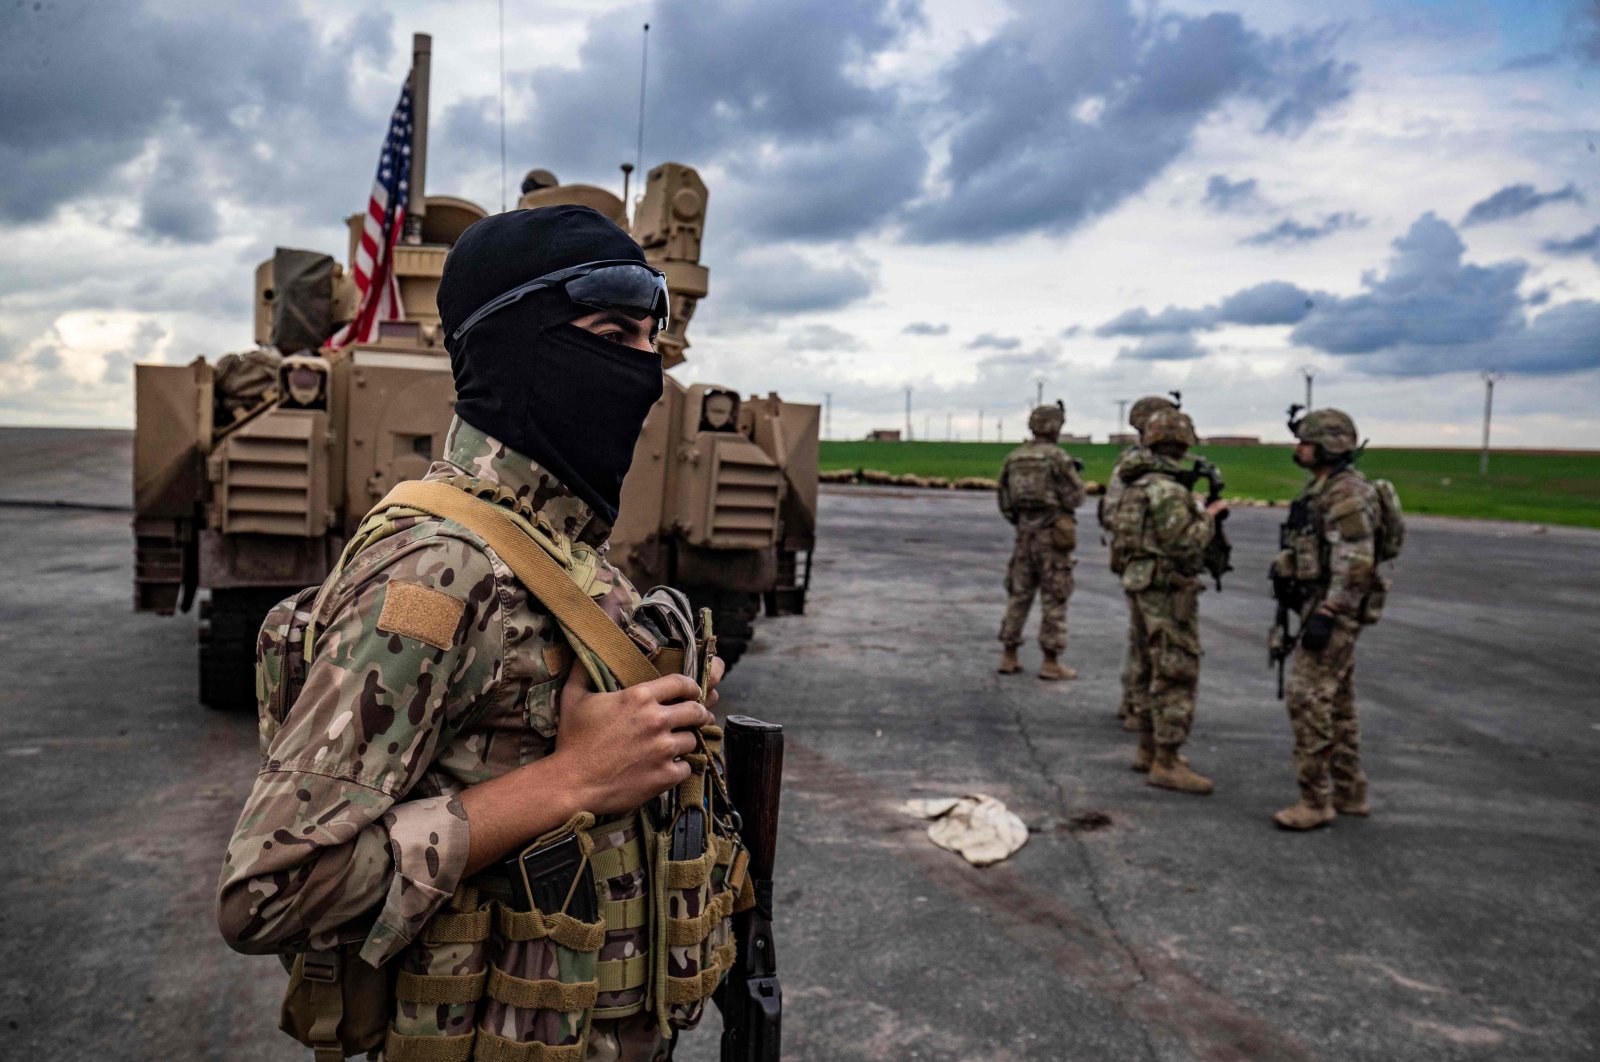 A PKK/YPG terrorist (L) and U.S. soldiers near an armored military vehicle in Hassakeh, Syria, March 27, 2023. (AFP Photo)